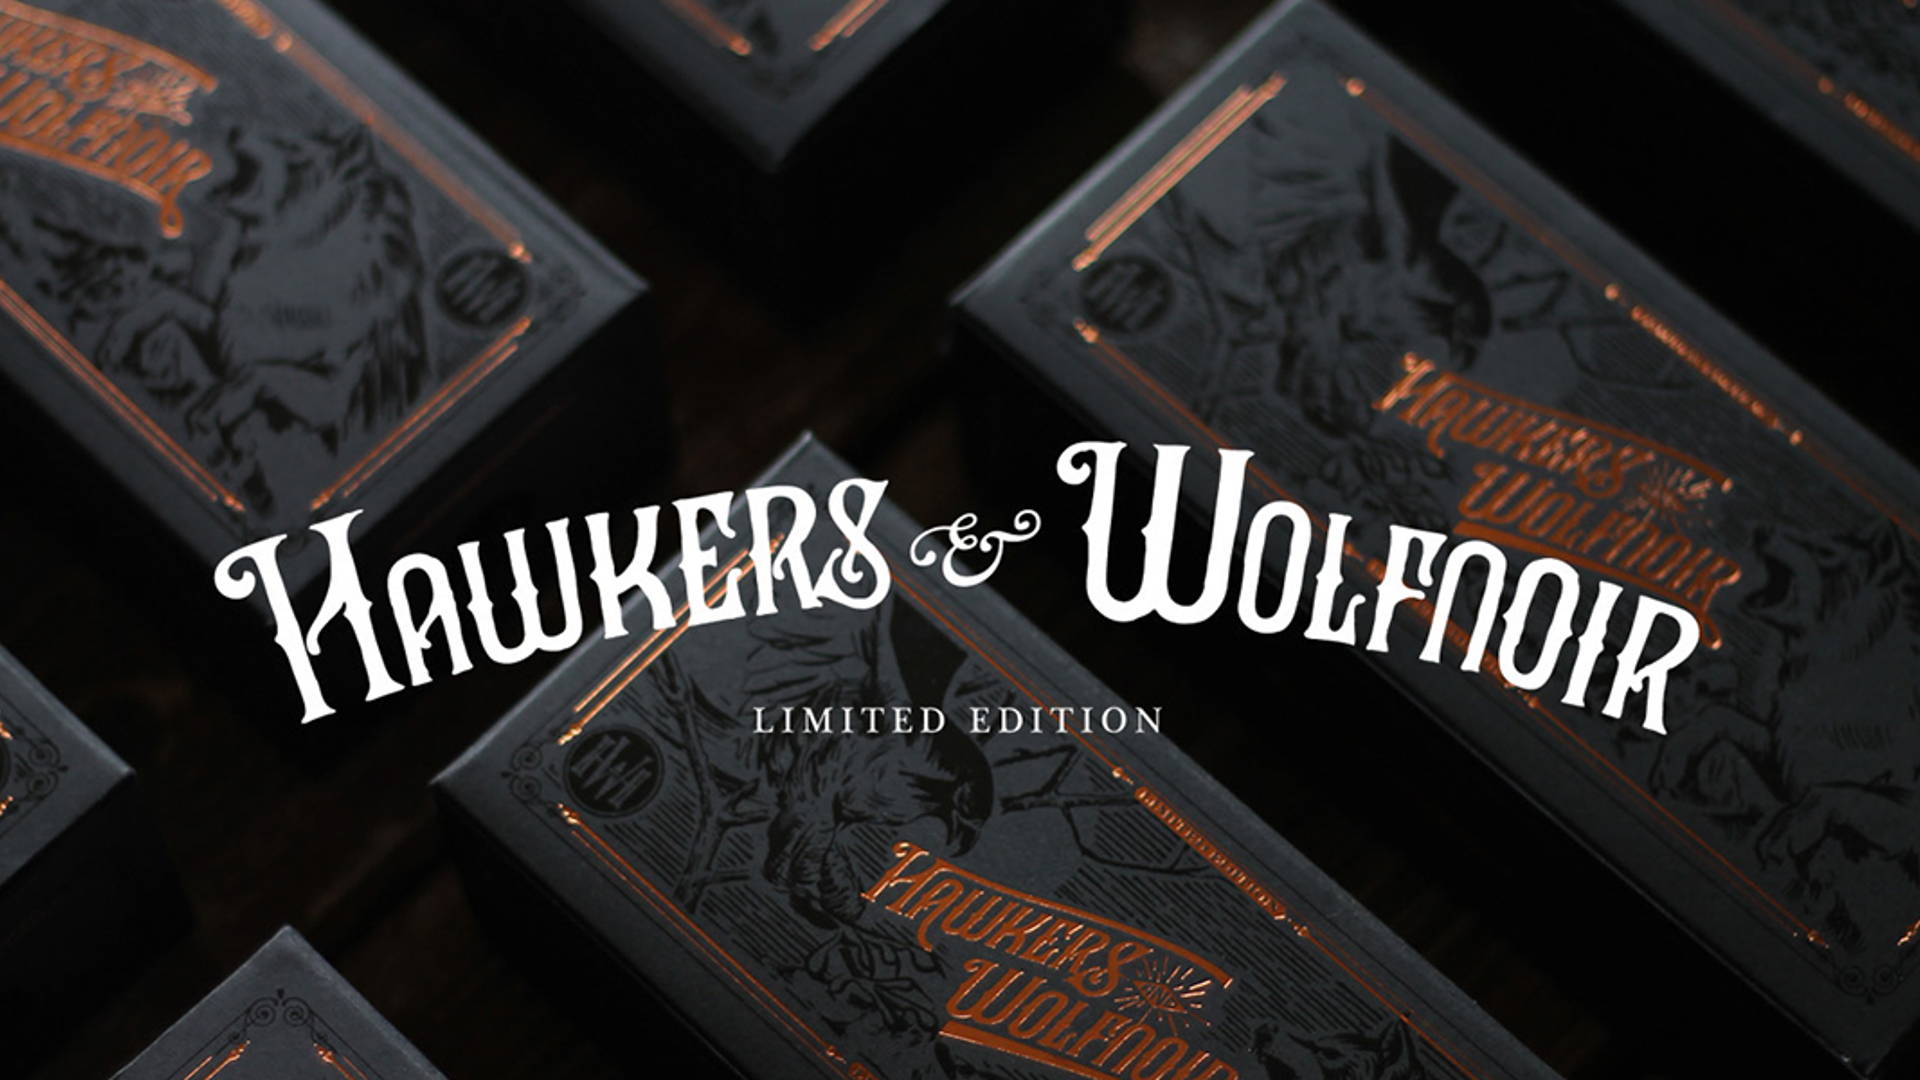 Limited edition перевод. Limited Edition. Limited Edition картинка. Hawkers & Wolfnoir. Swedebn Limited Edition.